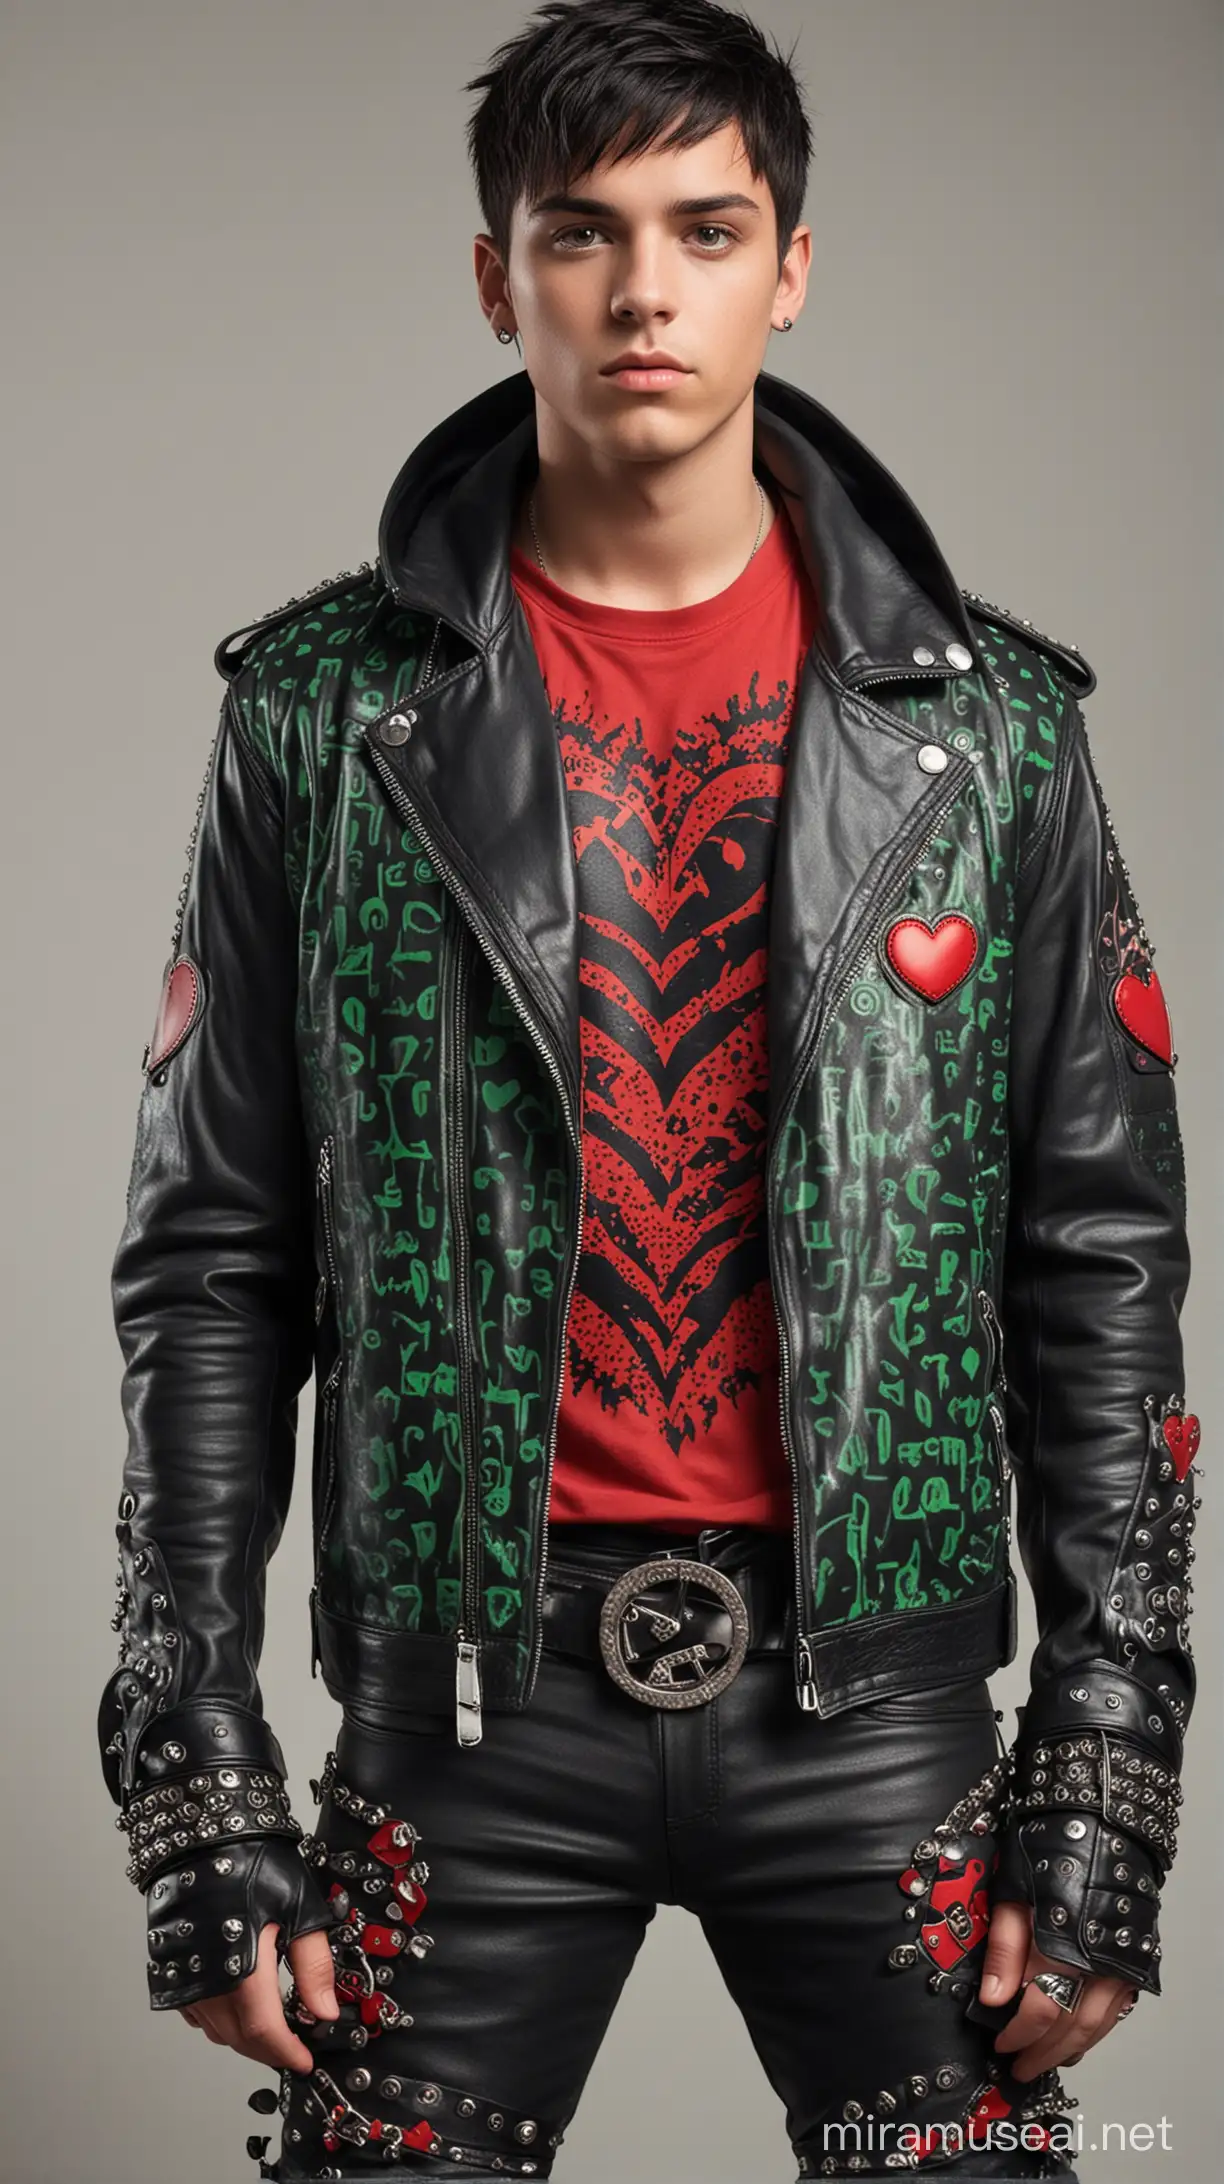 a young man with short black hair with red highlights and piercing green eyes. He wears a red shirt with black heart patterns hidden under a red and black leather jacket with studs on the sleeves and hood, as well as a heart emblem on the back. He rocks black leather pants with red patches, matching combat boots with one being red and the other being black, a studded belt with a heart buckle, and fingerless gloves.